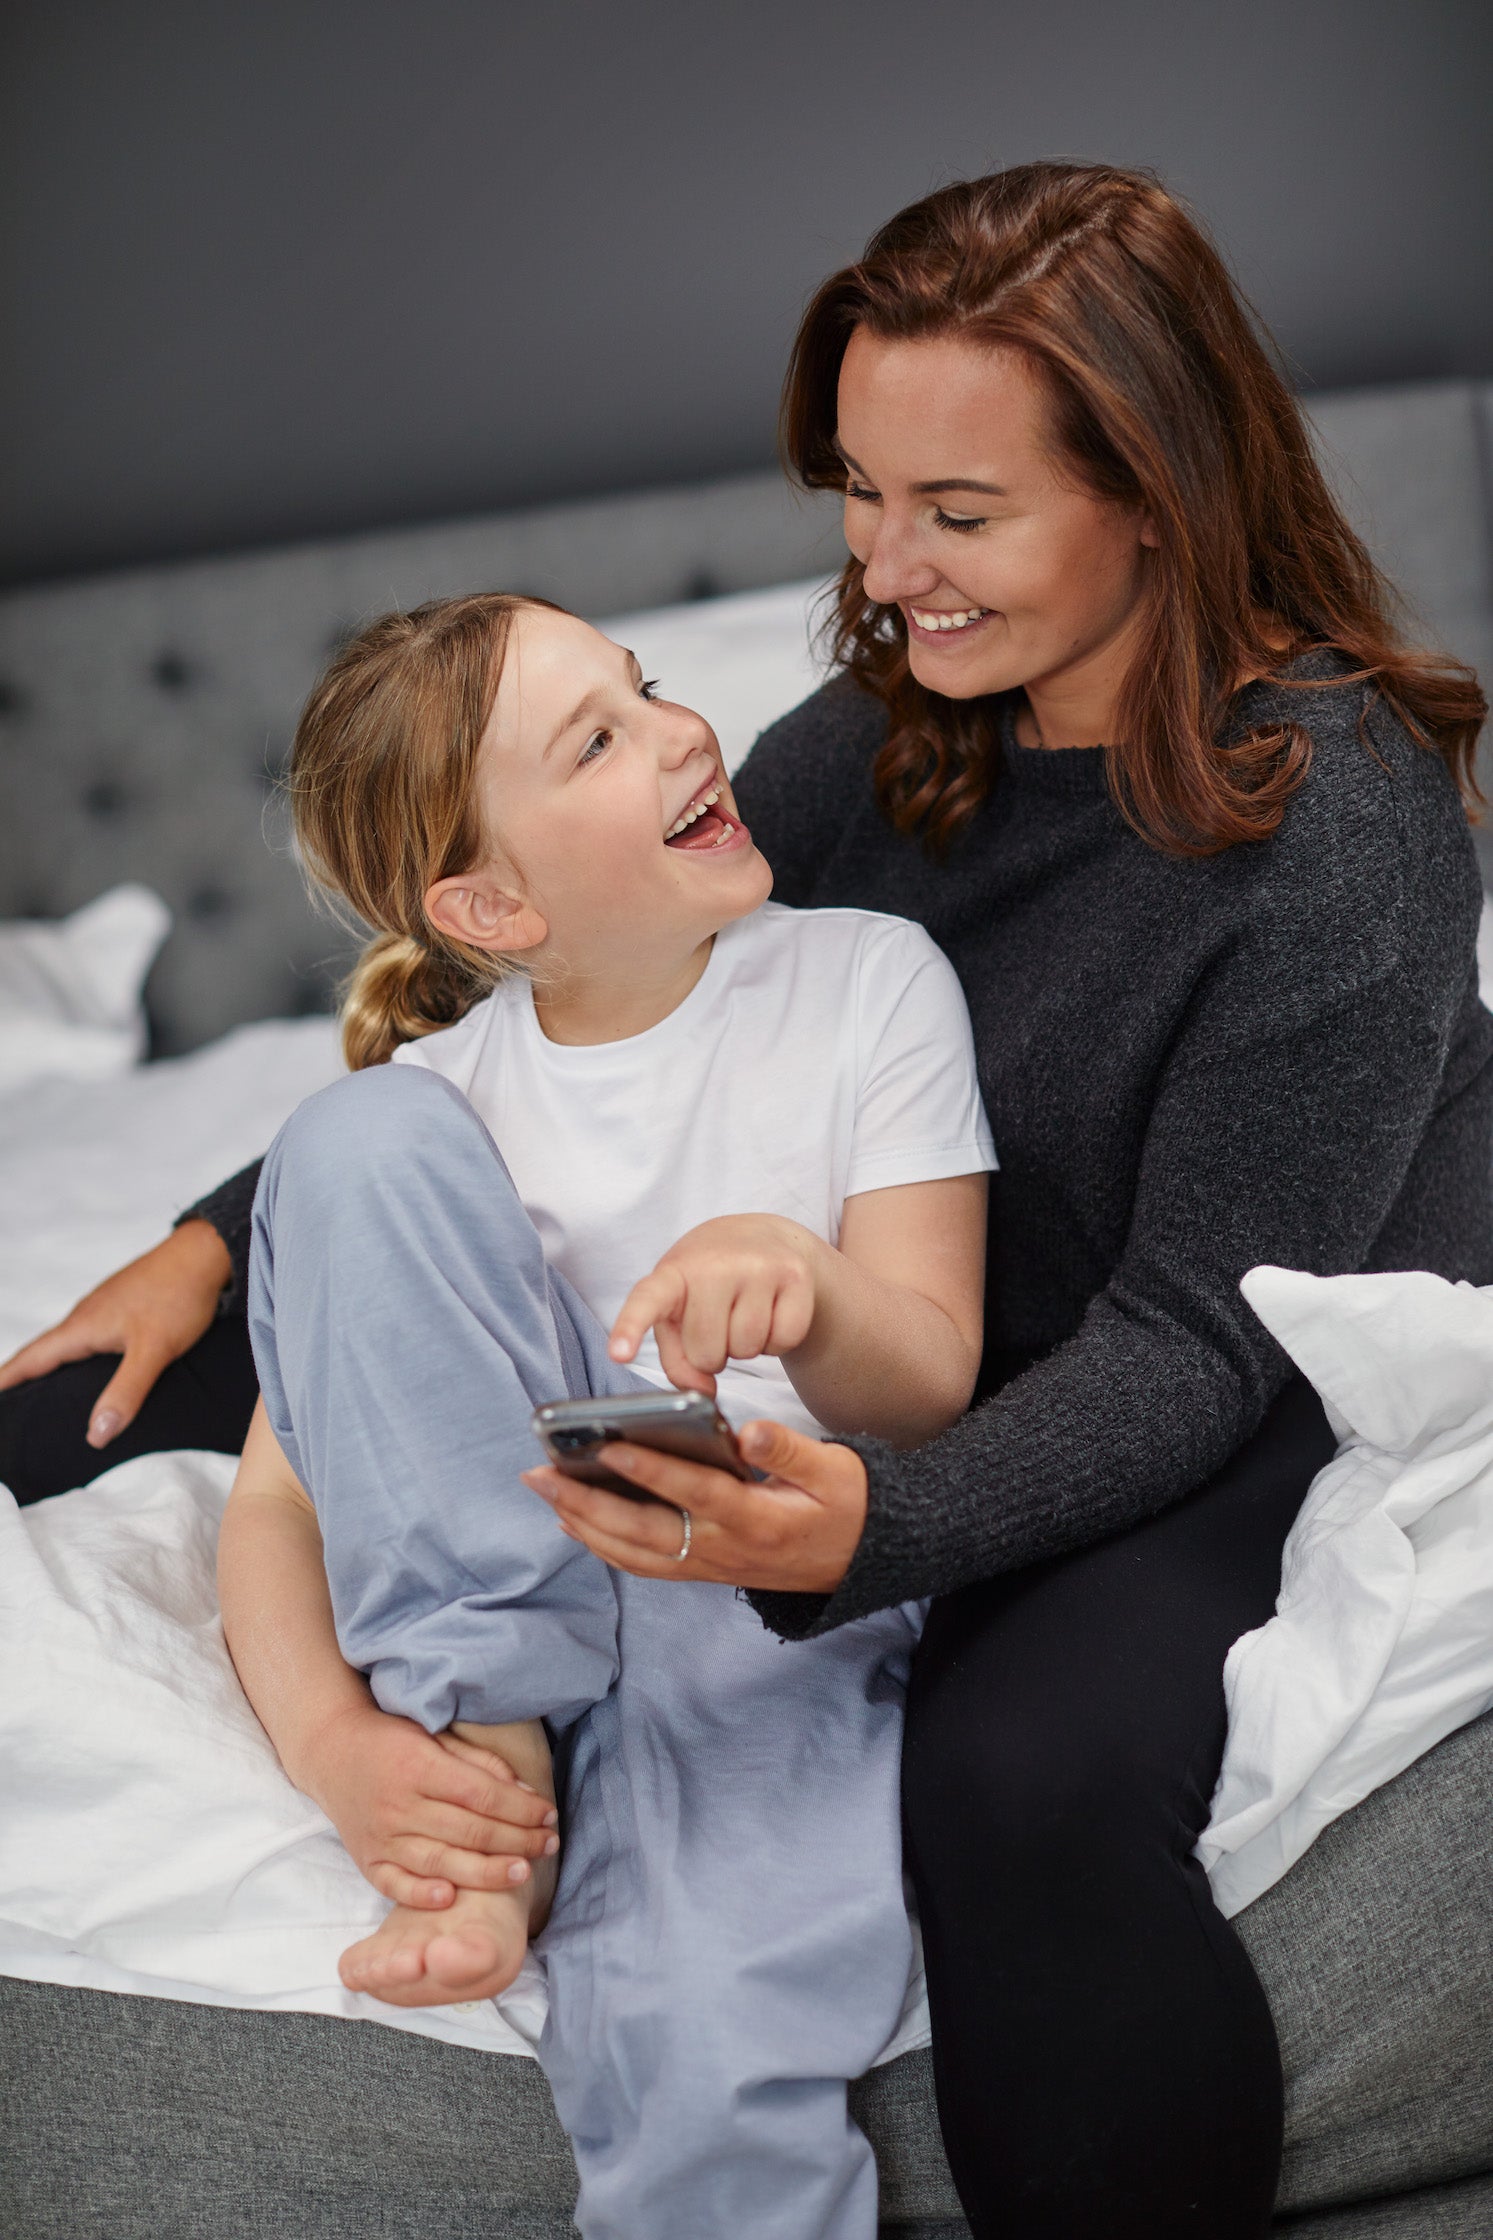 Involve the child when planning bedwetting treatment using a bedwetting alarm and app with calendar